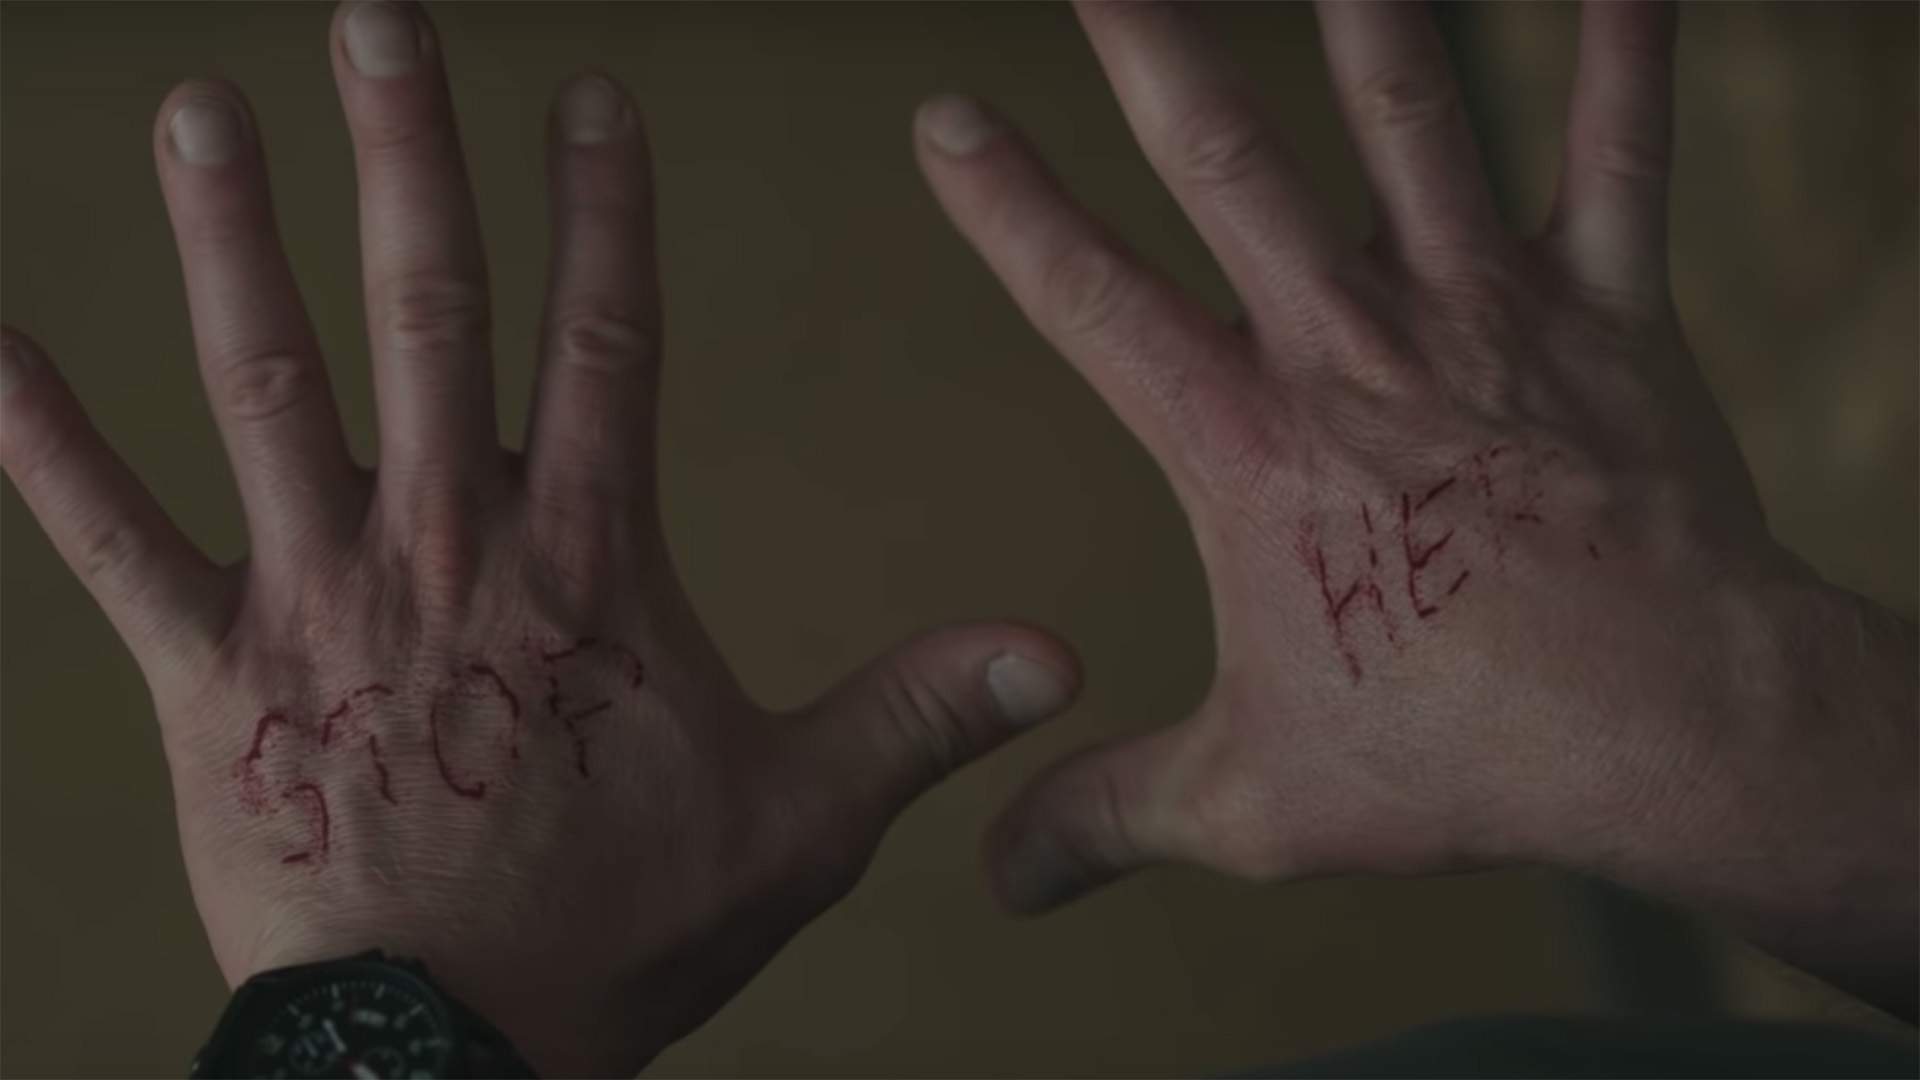 The Creepy Full Trailer for HBO's New Stephen King-Penned Murder Mystery 'The Outsider' Is Here